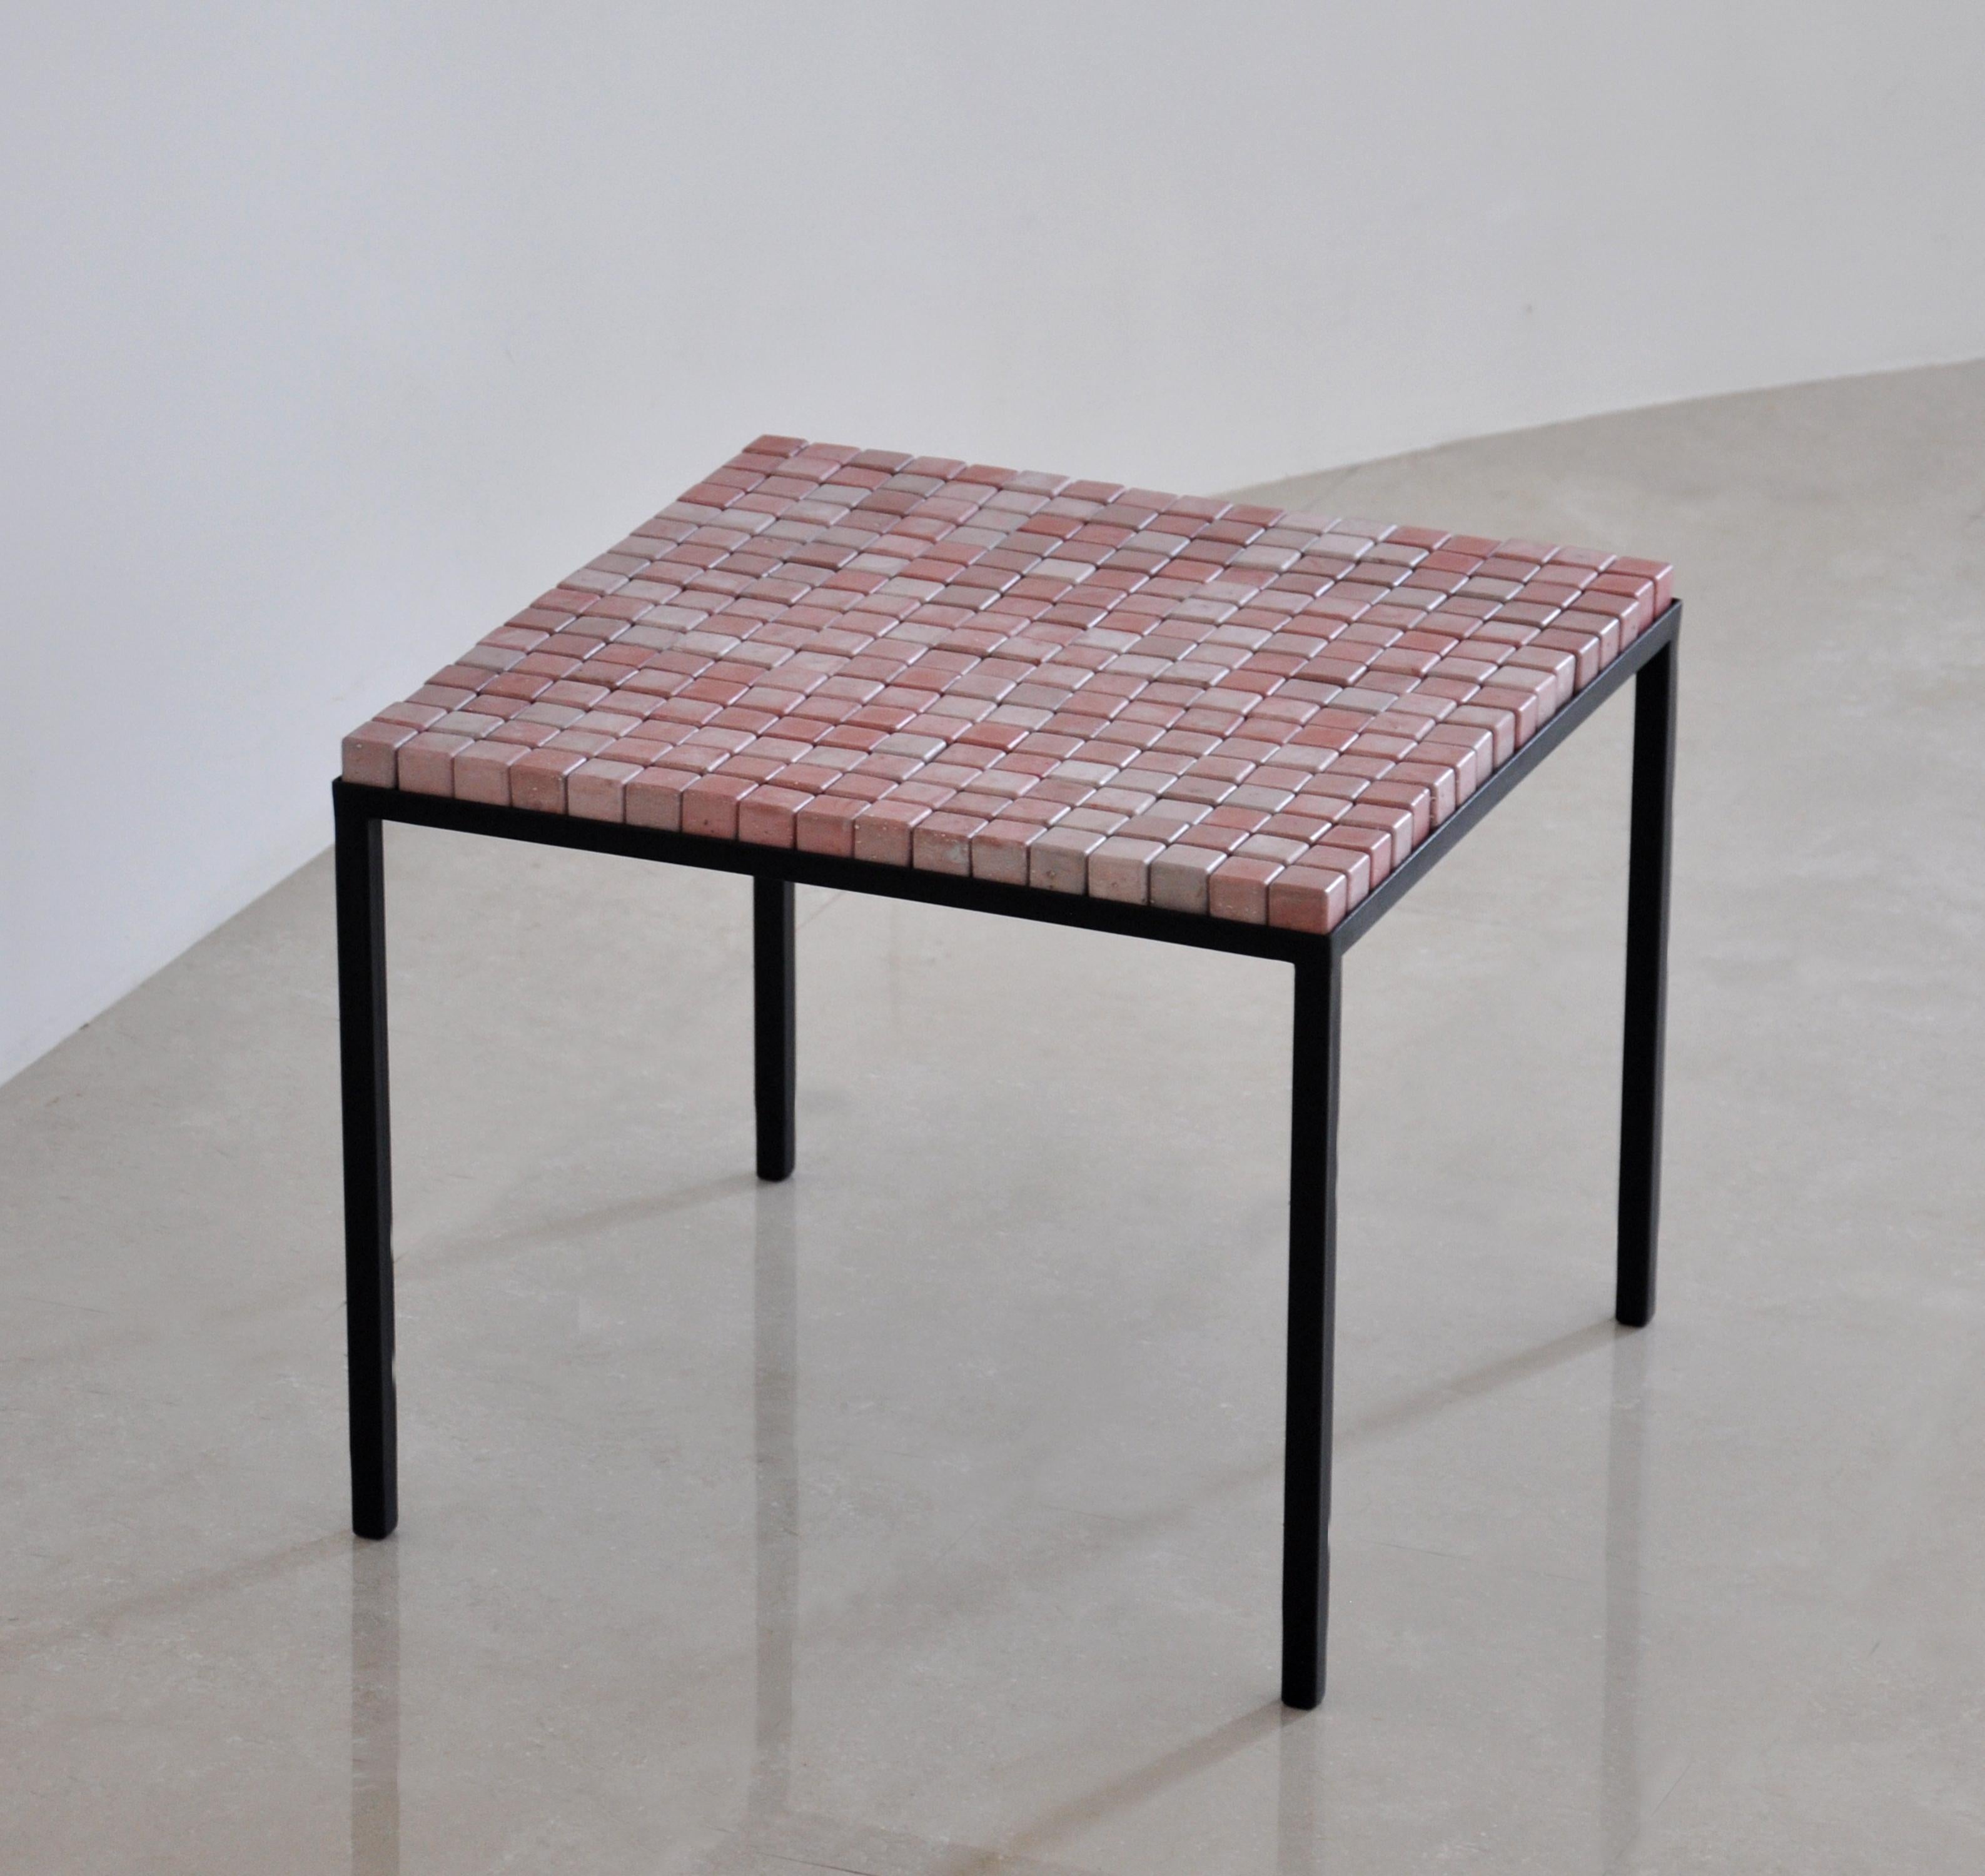 Concrete red cube table by Miriam Loellmann
Edition of 10
Signed
Materials: colored concrete, steel (hand painted), leather
Dimensions: 56.5 x 56.5 x 56.5 cm
Weight: 22 kg.

Cubes are removable, each table-top is unique, one of a kind and